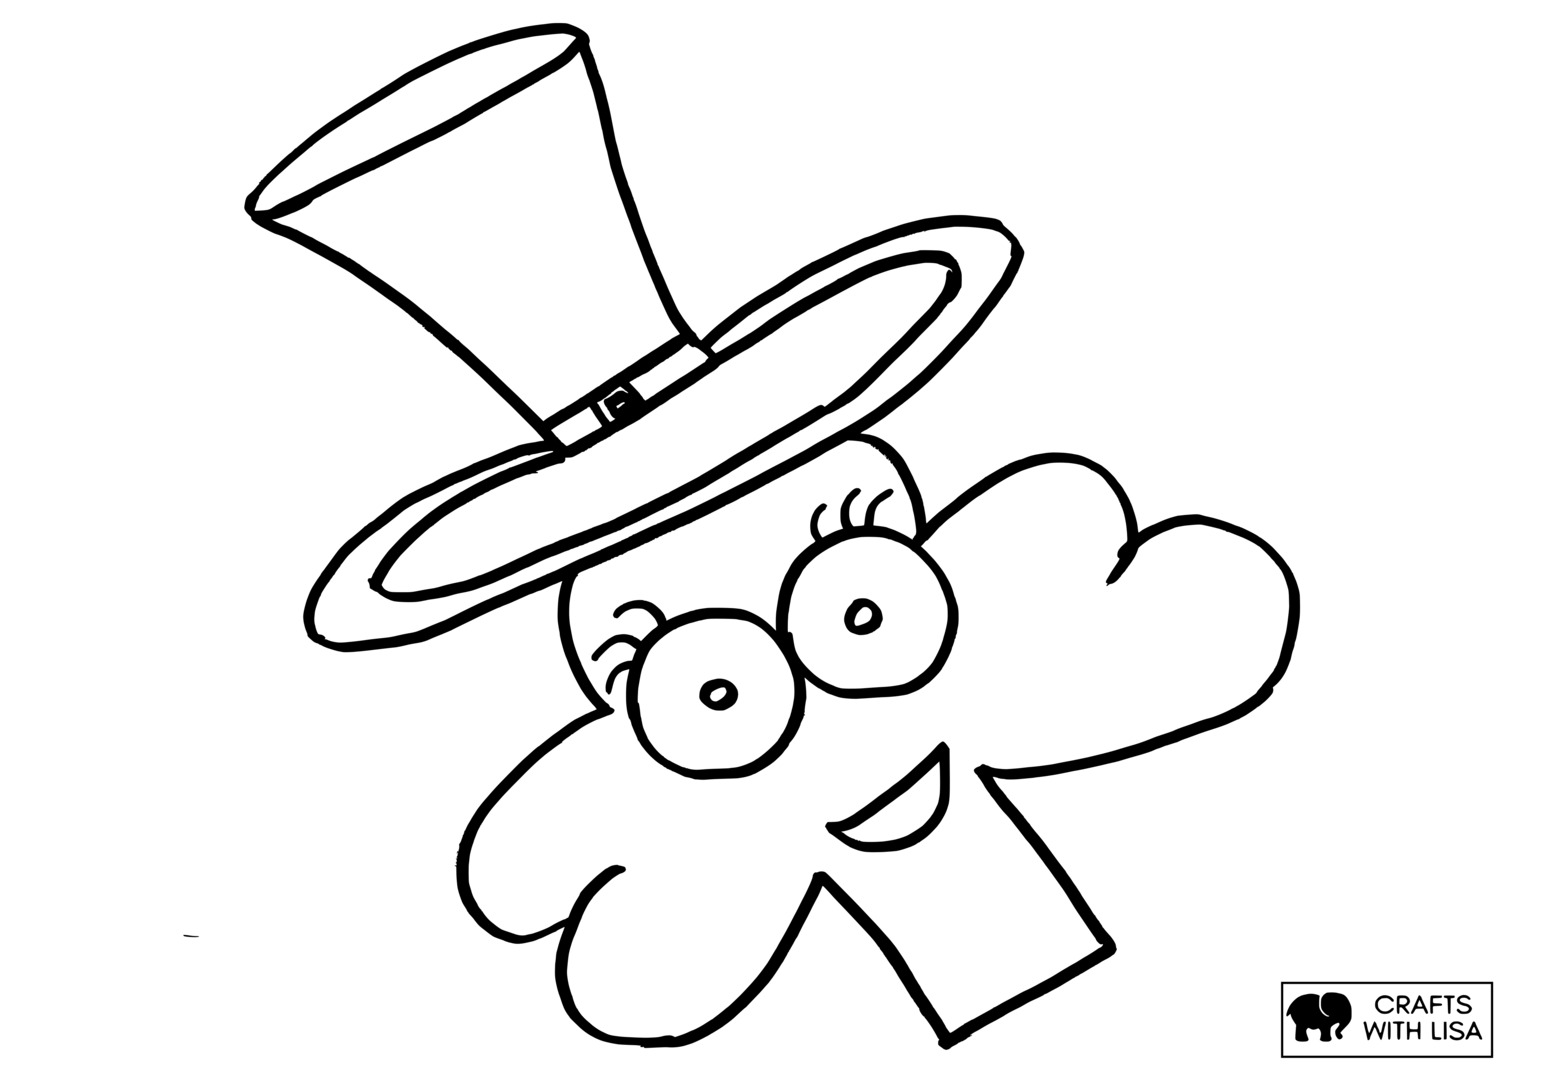 St patricks day shamrocks face with hat coloring page